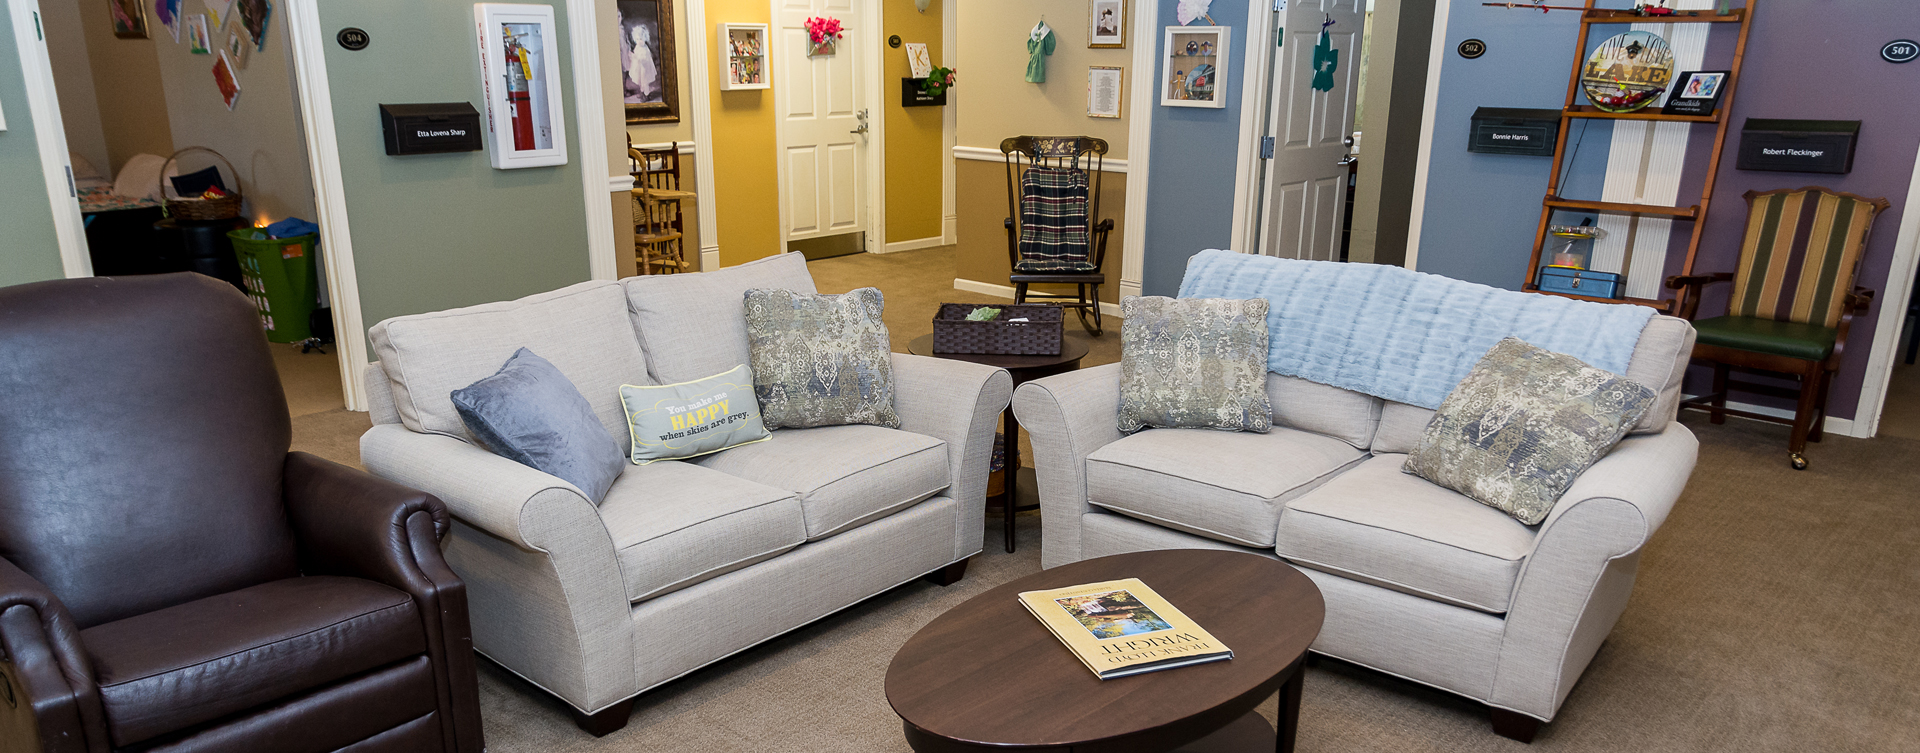 Mary B’s living room provides a smaller, more intimate setting to encourage interaction at Bickford of Oswego